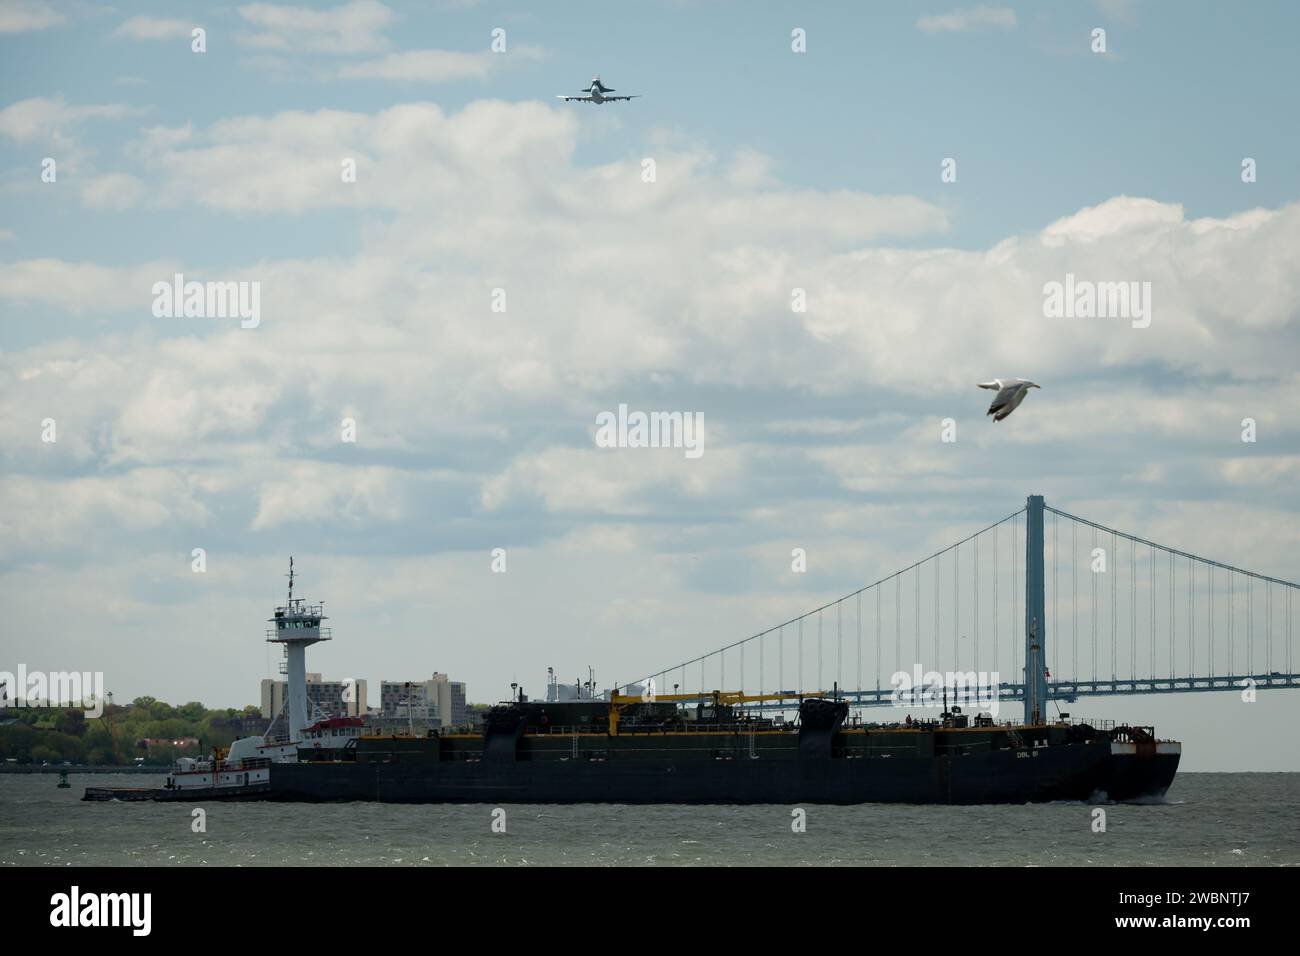 Space shuttle Enterprise, mounted atop a NASA 747 Shuttle Carrier Aircraft (SCA), is seen as it flies over the Verrazano Bridge, Friday, April 27, 2012, in New York. Enterprise was the first shuttle orbiter built for NASA performing test flights in the atmosphere and was incapable of spaceflight. Originally housed at the Smithsonian's Steven F. Udvar-Hazy Center, Enterprise will be demated from the SCA and placed on a barge that will eventually be moved by tugboat up the Hudson River to the Intrepid Sea, Air & Space Museum in June. Stock Photo